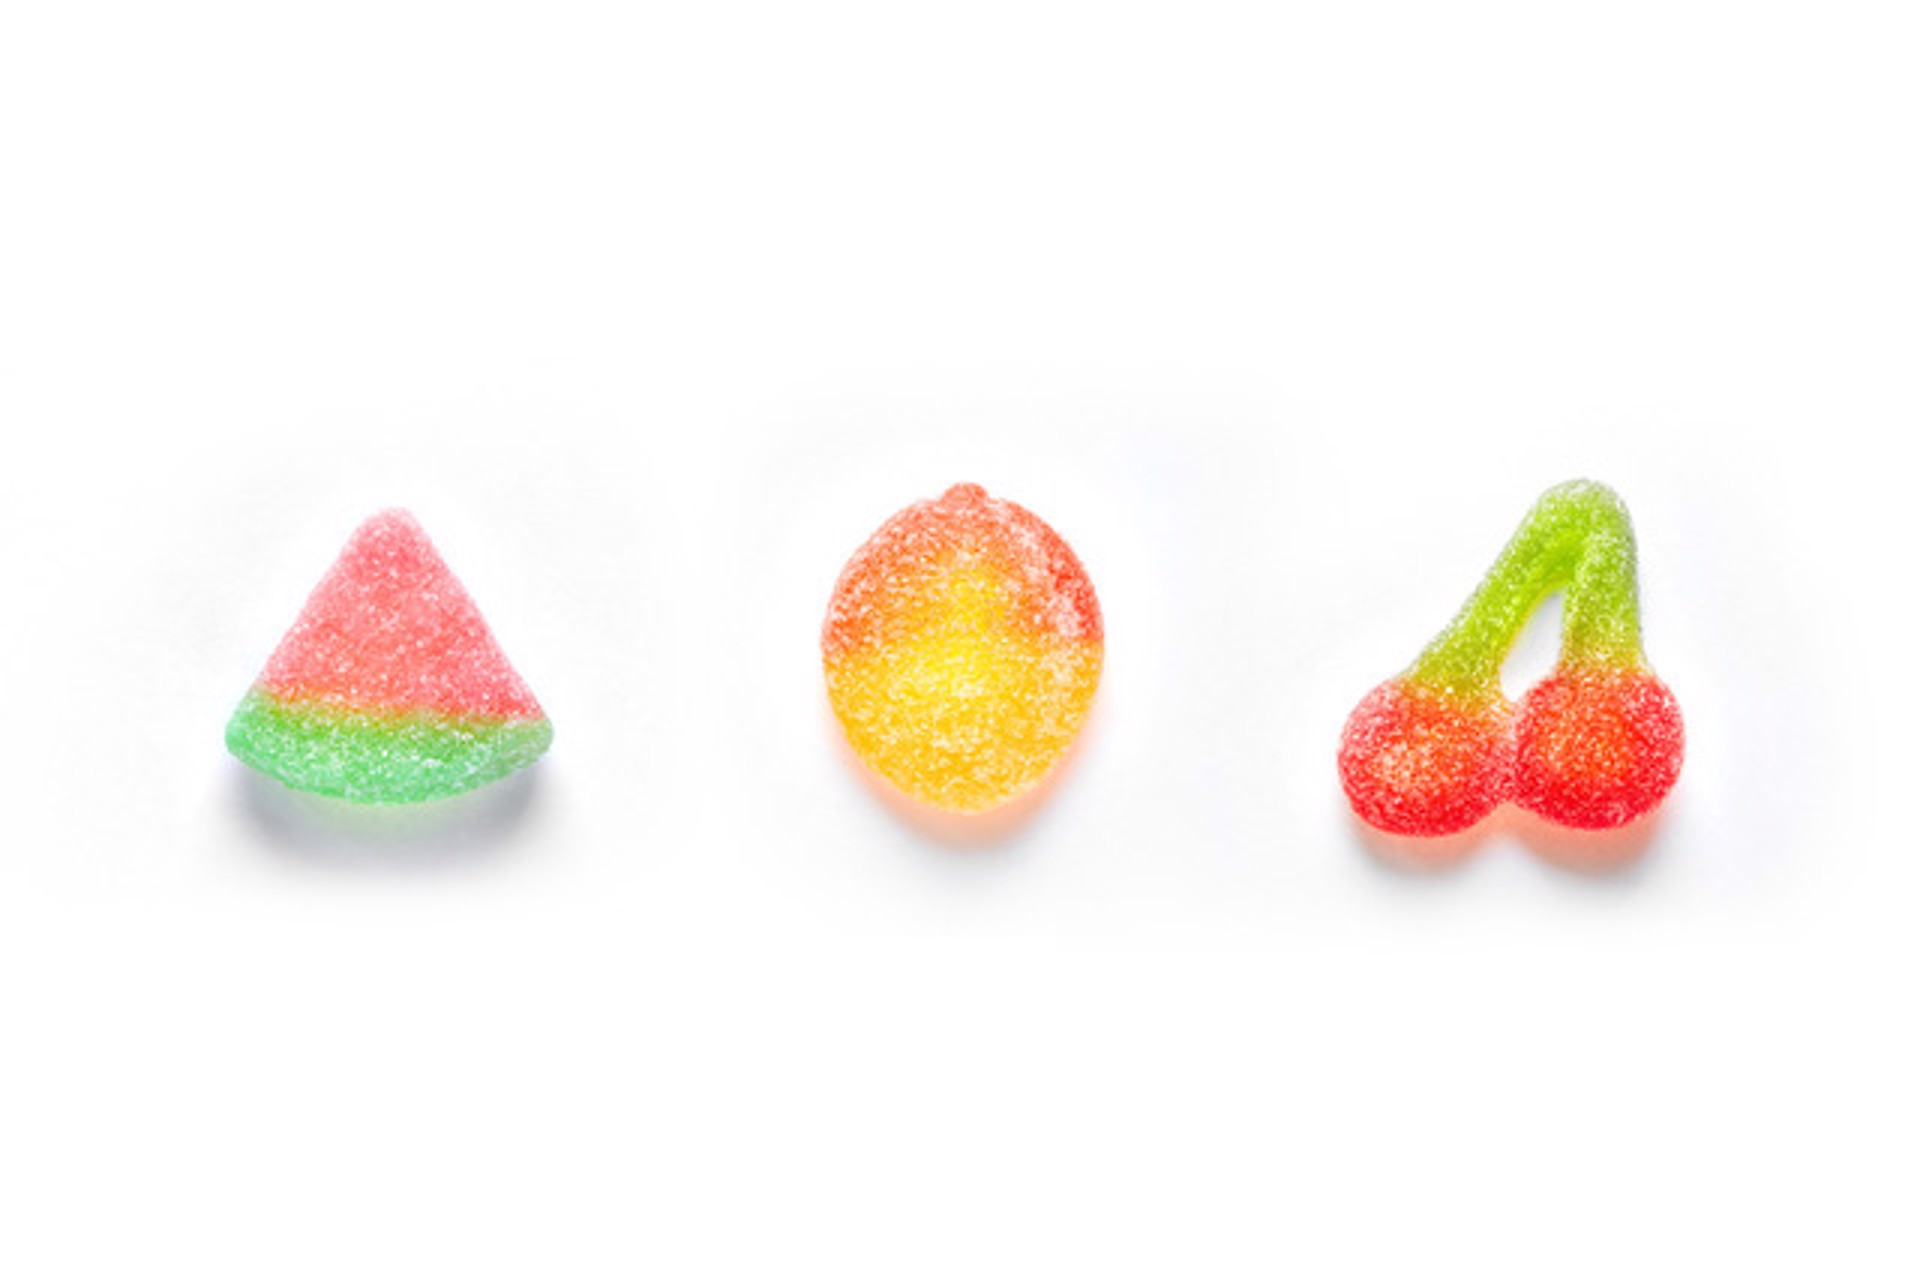 Fruits by Peter Andrew Lusztyk / Refined Sugar